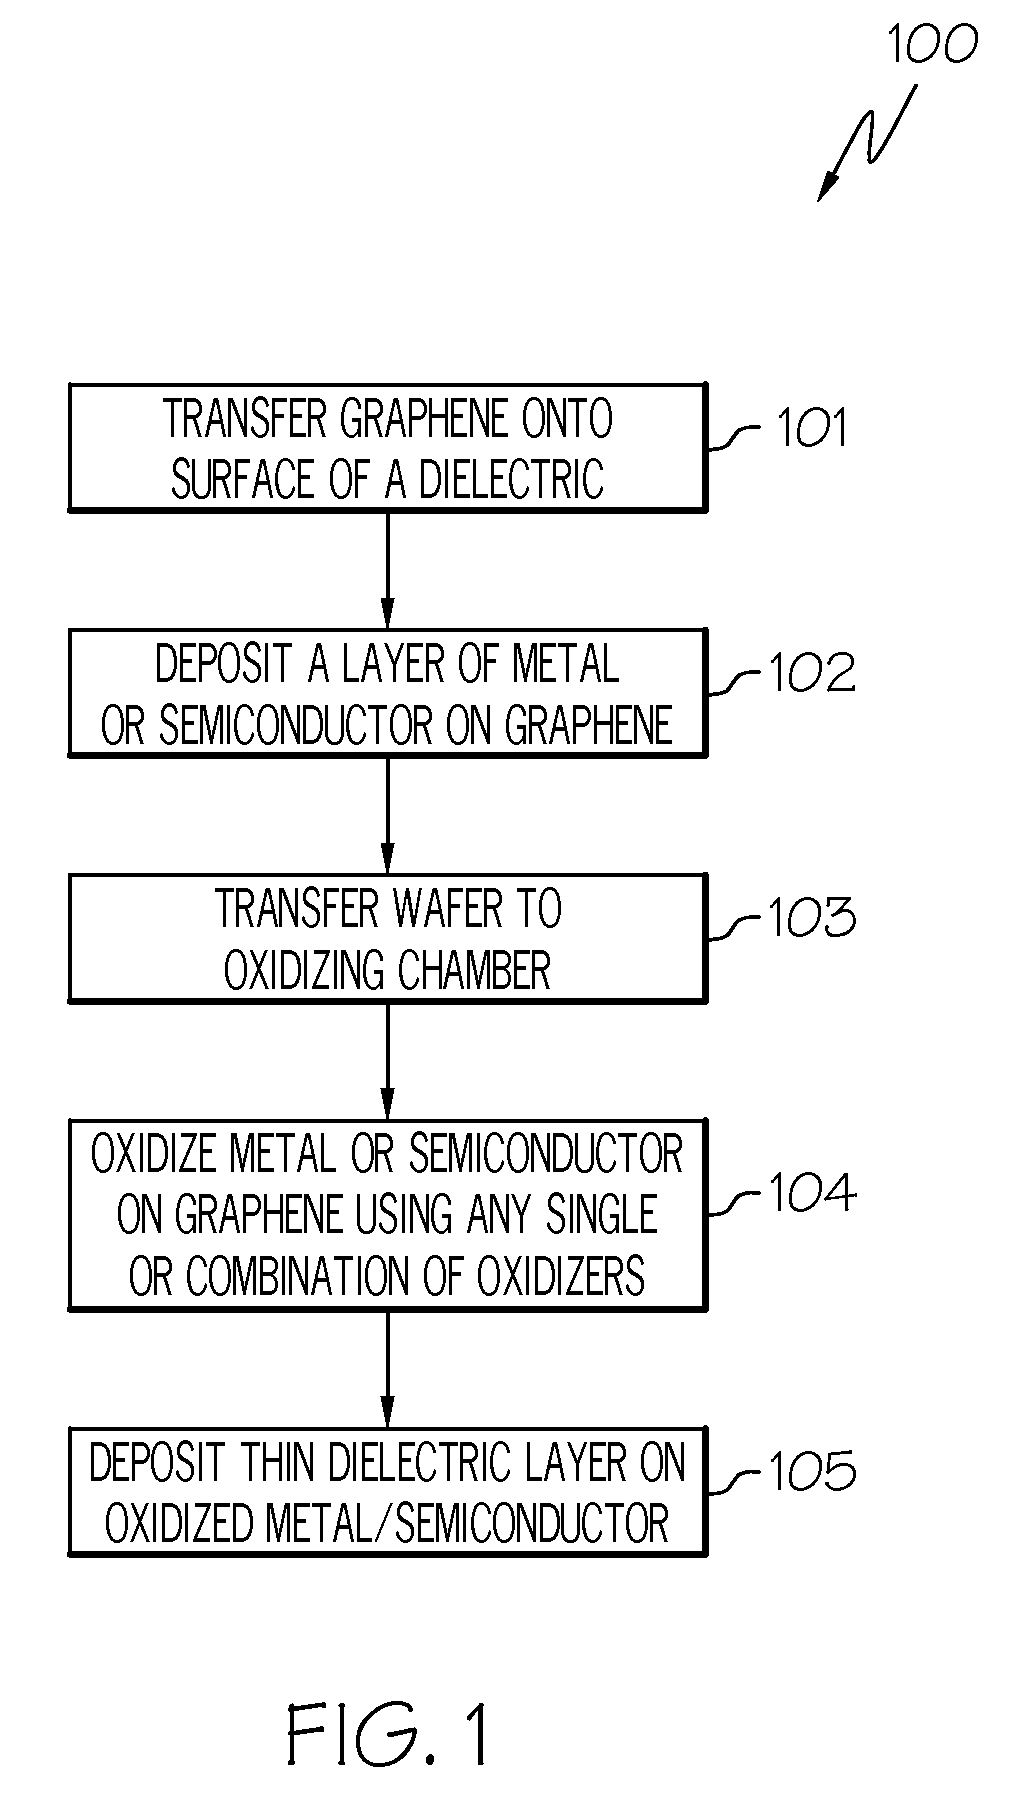 Establishing a uniformly thin dielectric layer on graphene in a semiconductor device without affecting the properties of graphene